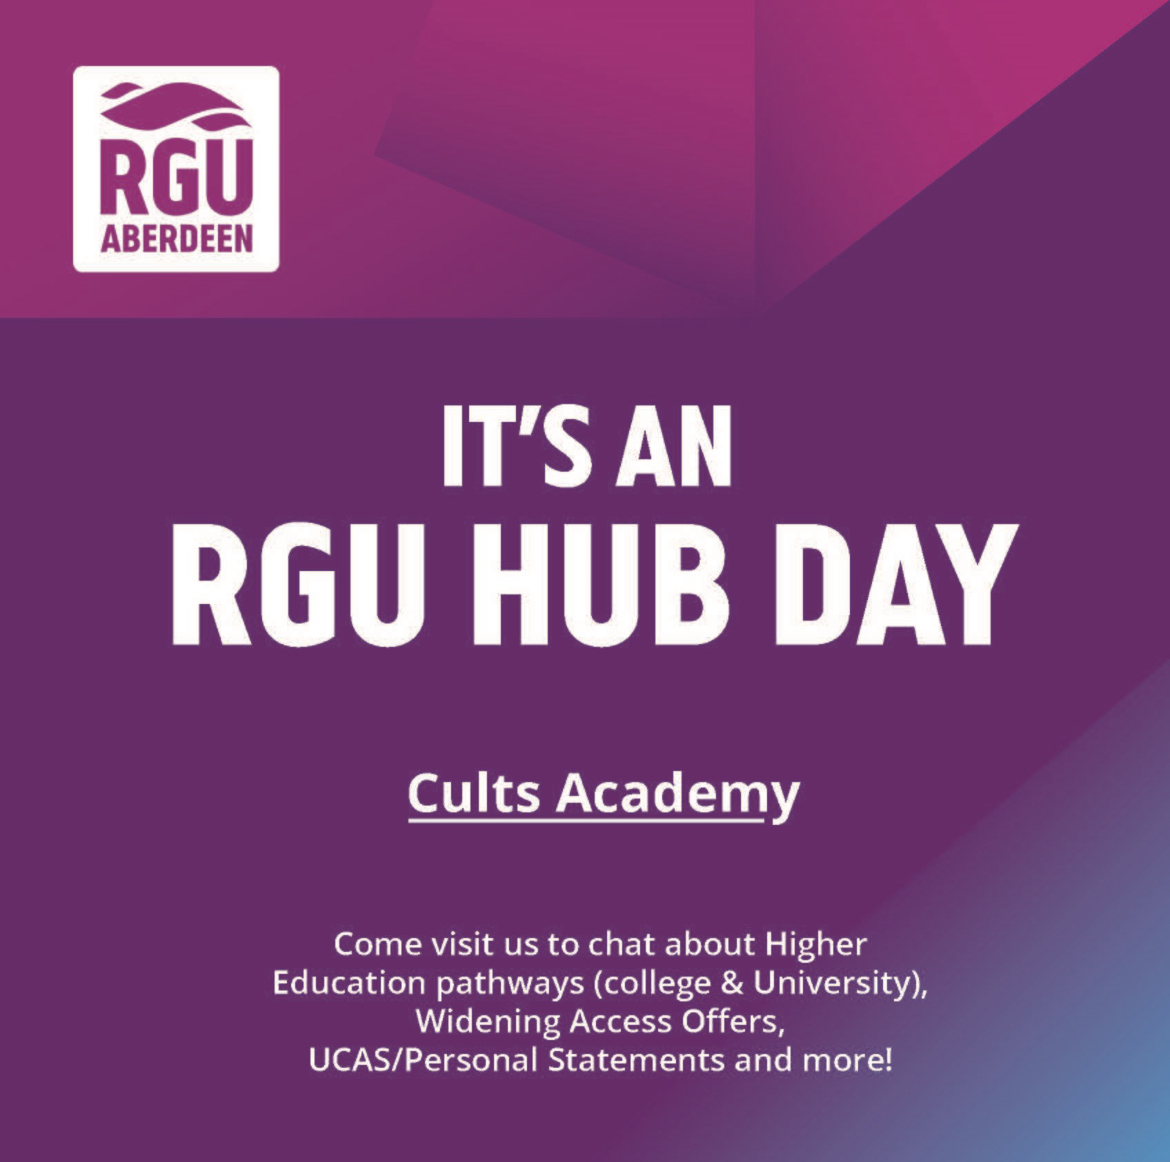 Hello @CultsAcademy Are looking forward to the Summer Holidays? 🍦 Louise is at your School today! You can chat to Louise about Life as a Student, Studying at RGU and More! If you have any questions over the summer please get in touch! ✉️: access@rgu.ac.uk